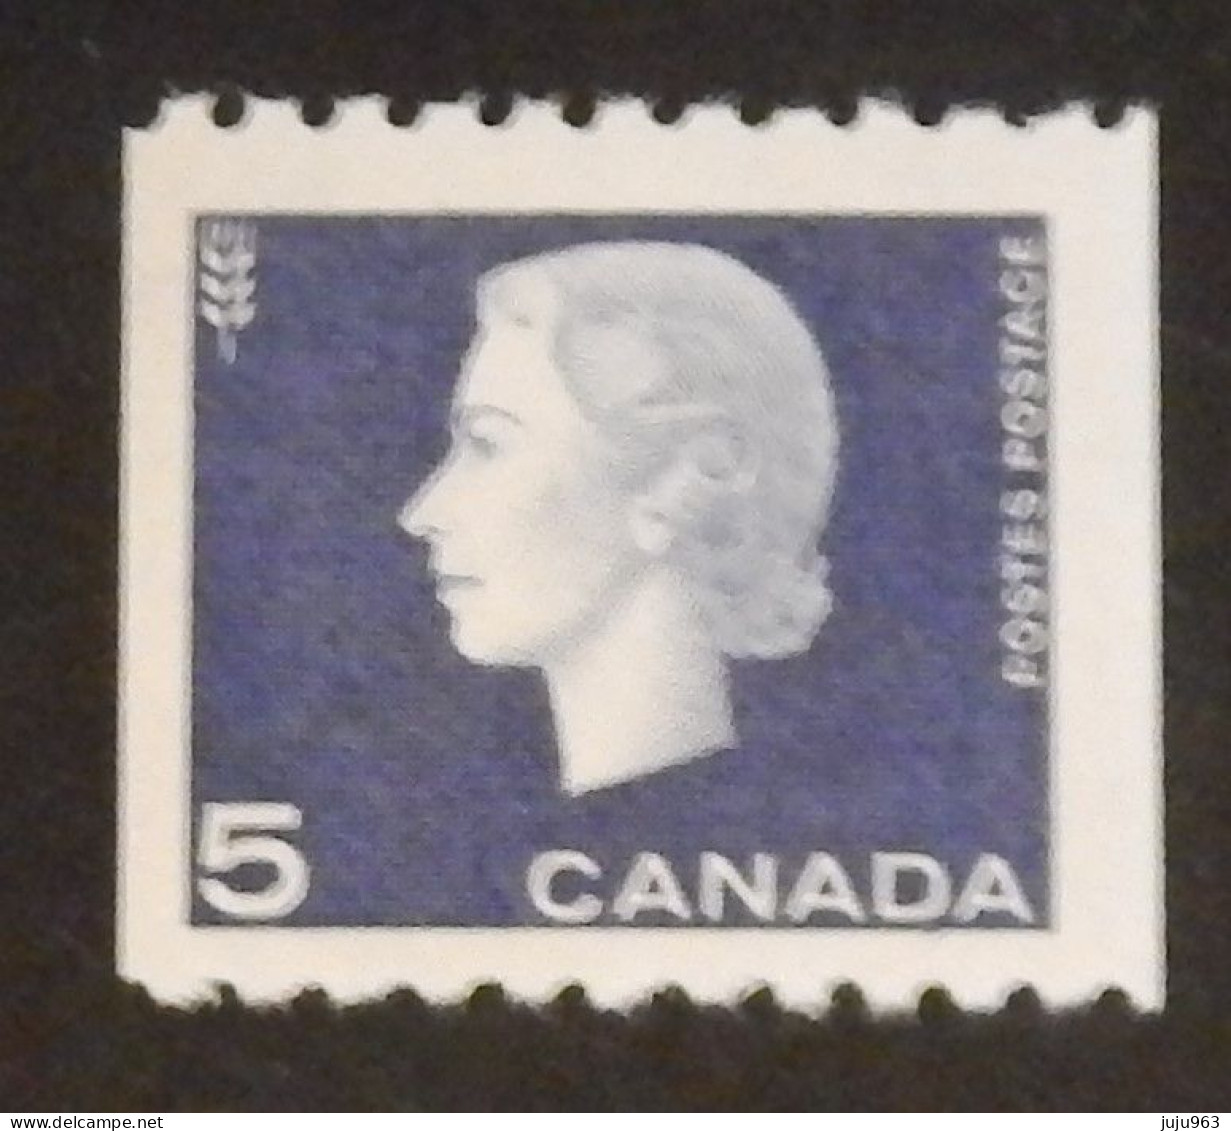 CANADA YT 332a NEUF**MNH " ELISABETH II" ANNÉE 1963 - Unused Stamps